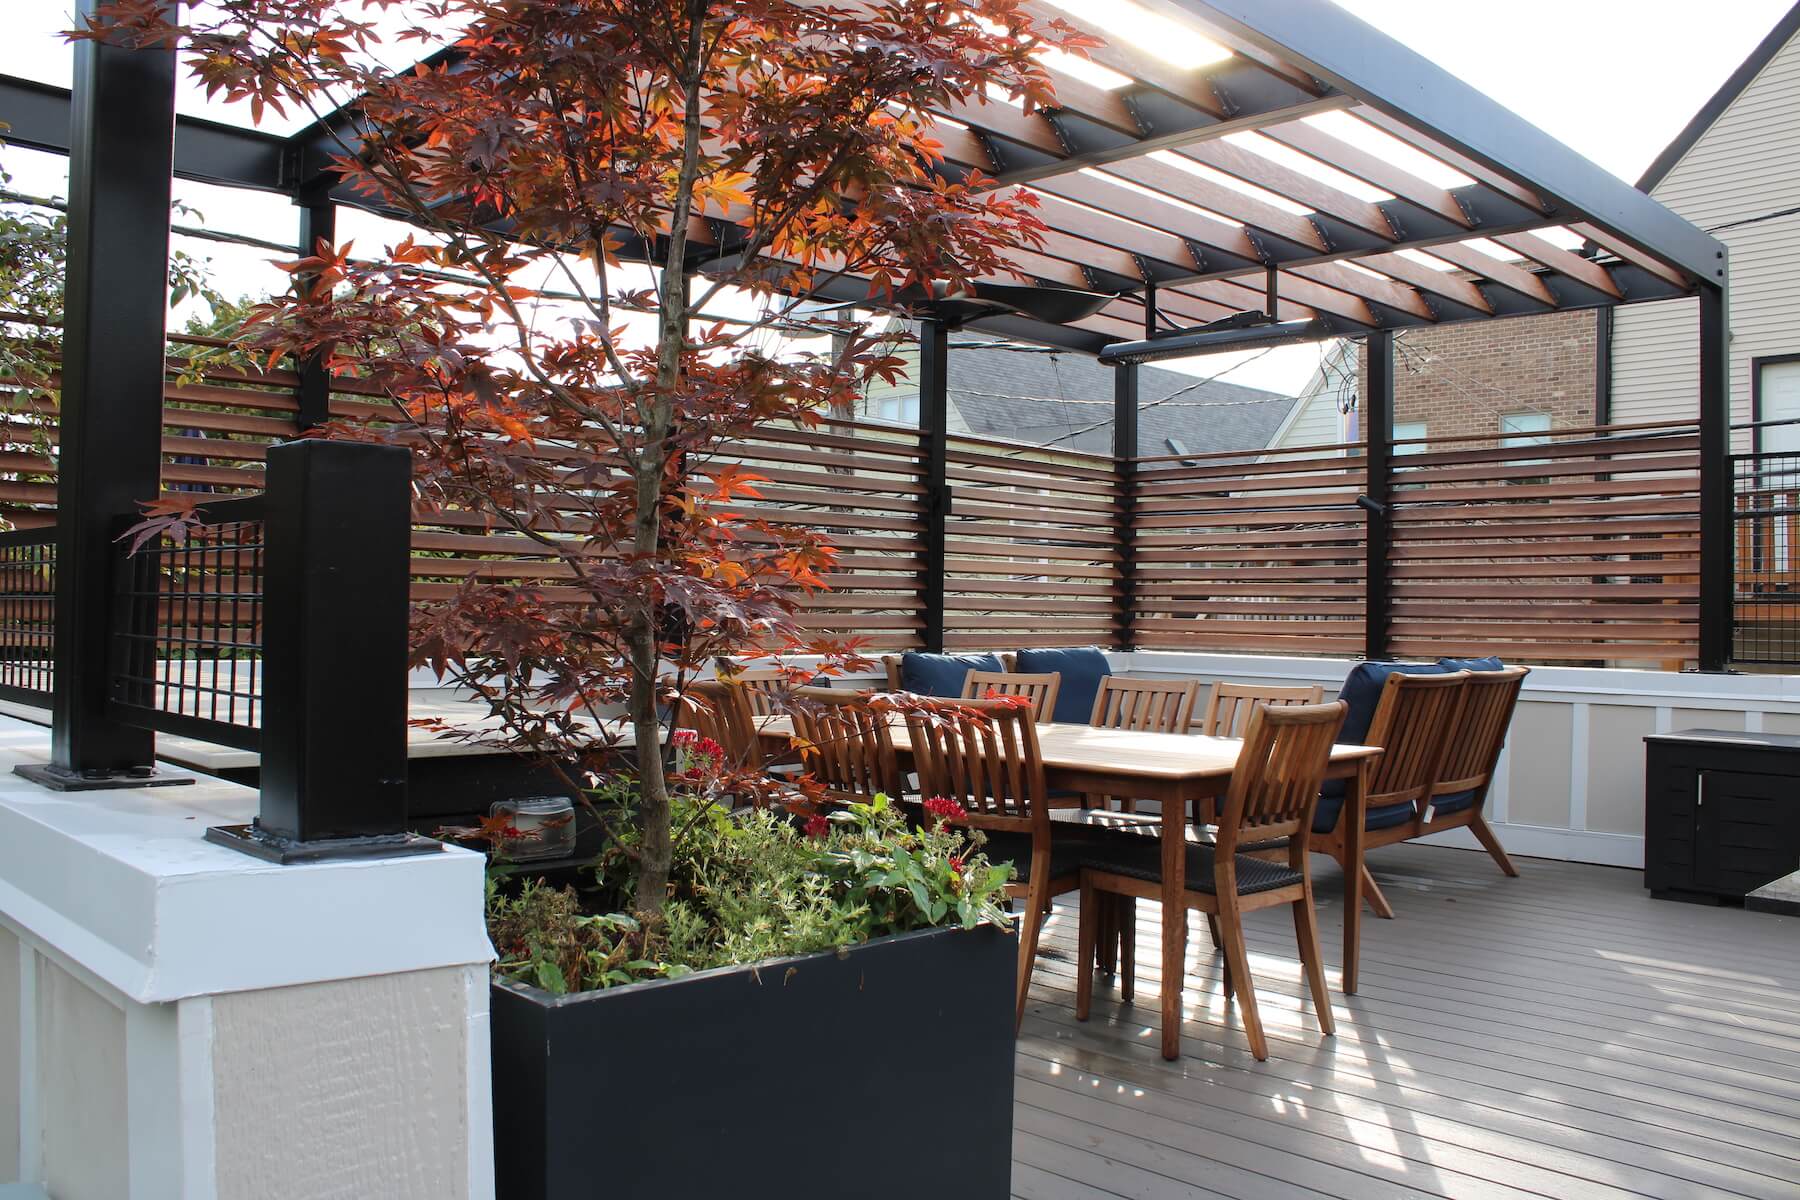 Garage roof deck with dining lincoln park chicago il